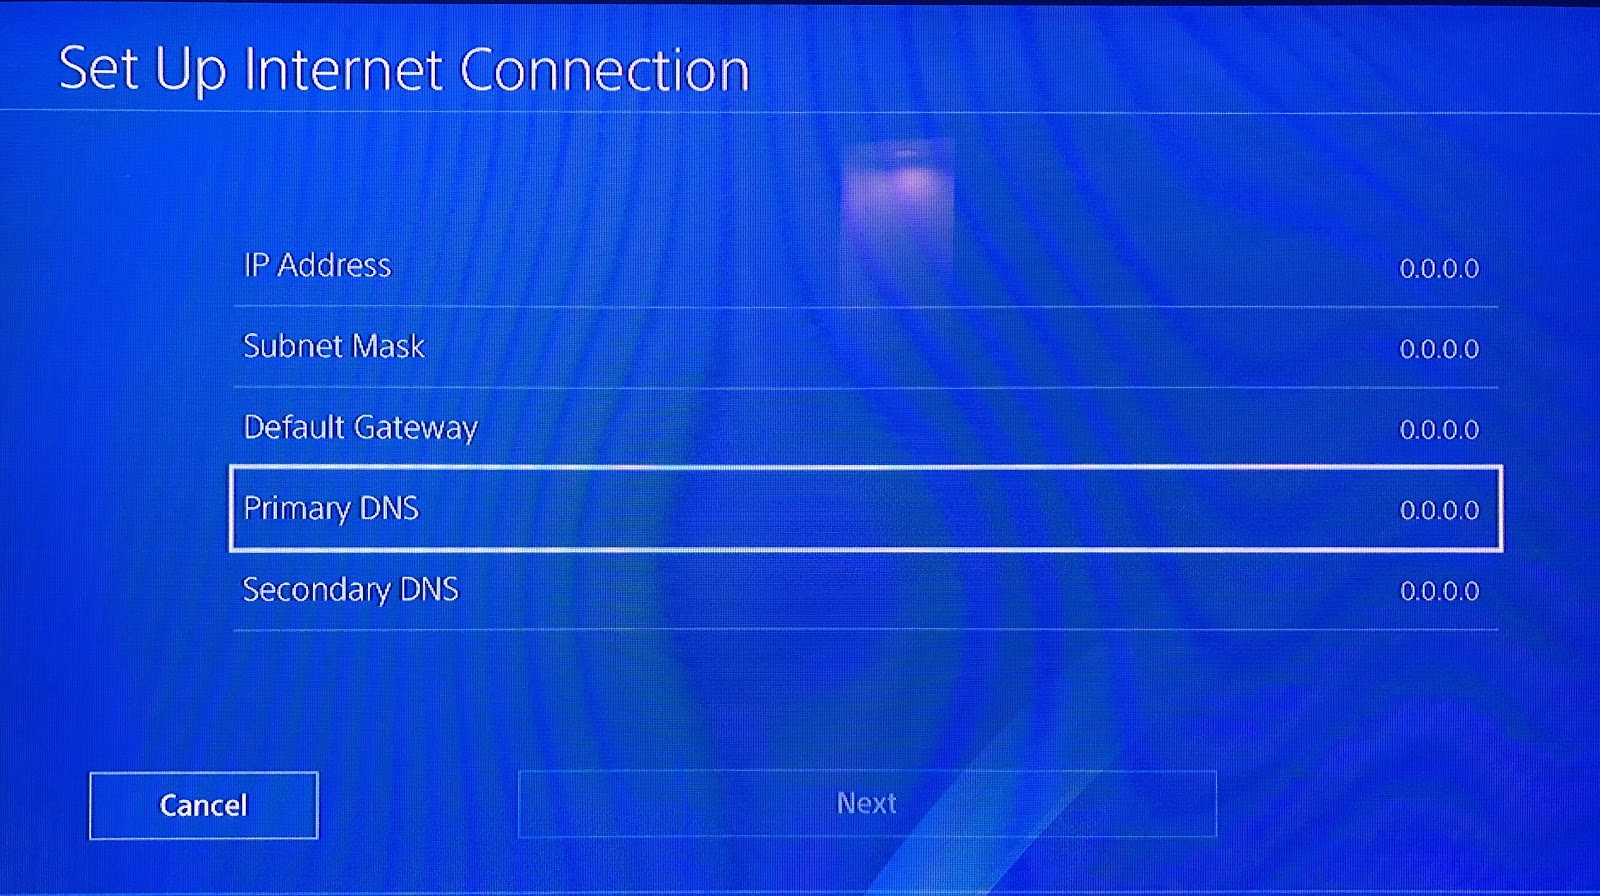 How To Improve PS4 Connection Speed - InMyArea.com